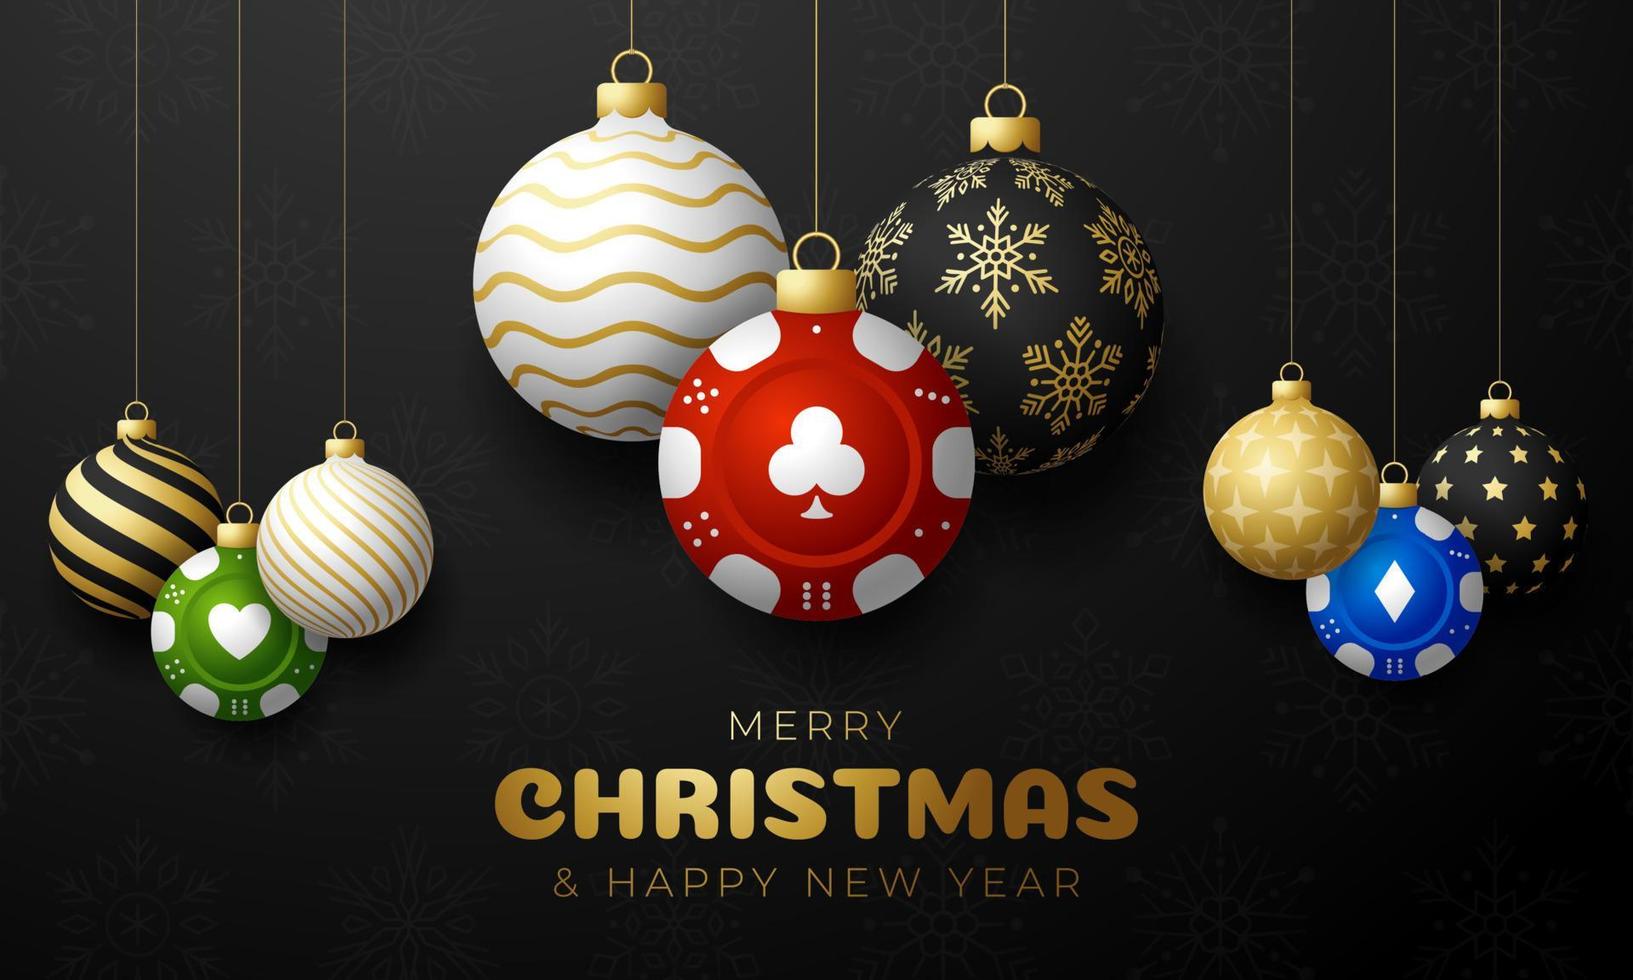 Casino Poker Christmas card. Merry Christmas sport greeting card. Hang on a thread casino poker chip as a xmas ball and golden bauble on black background vector